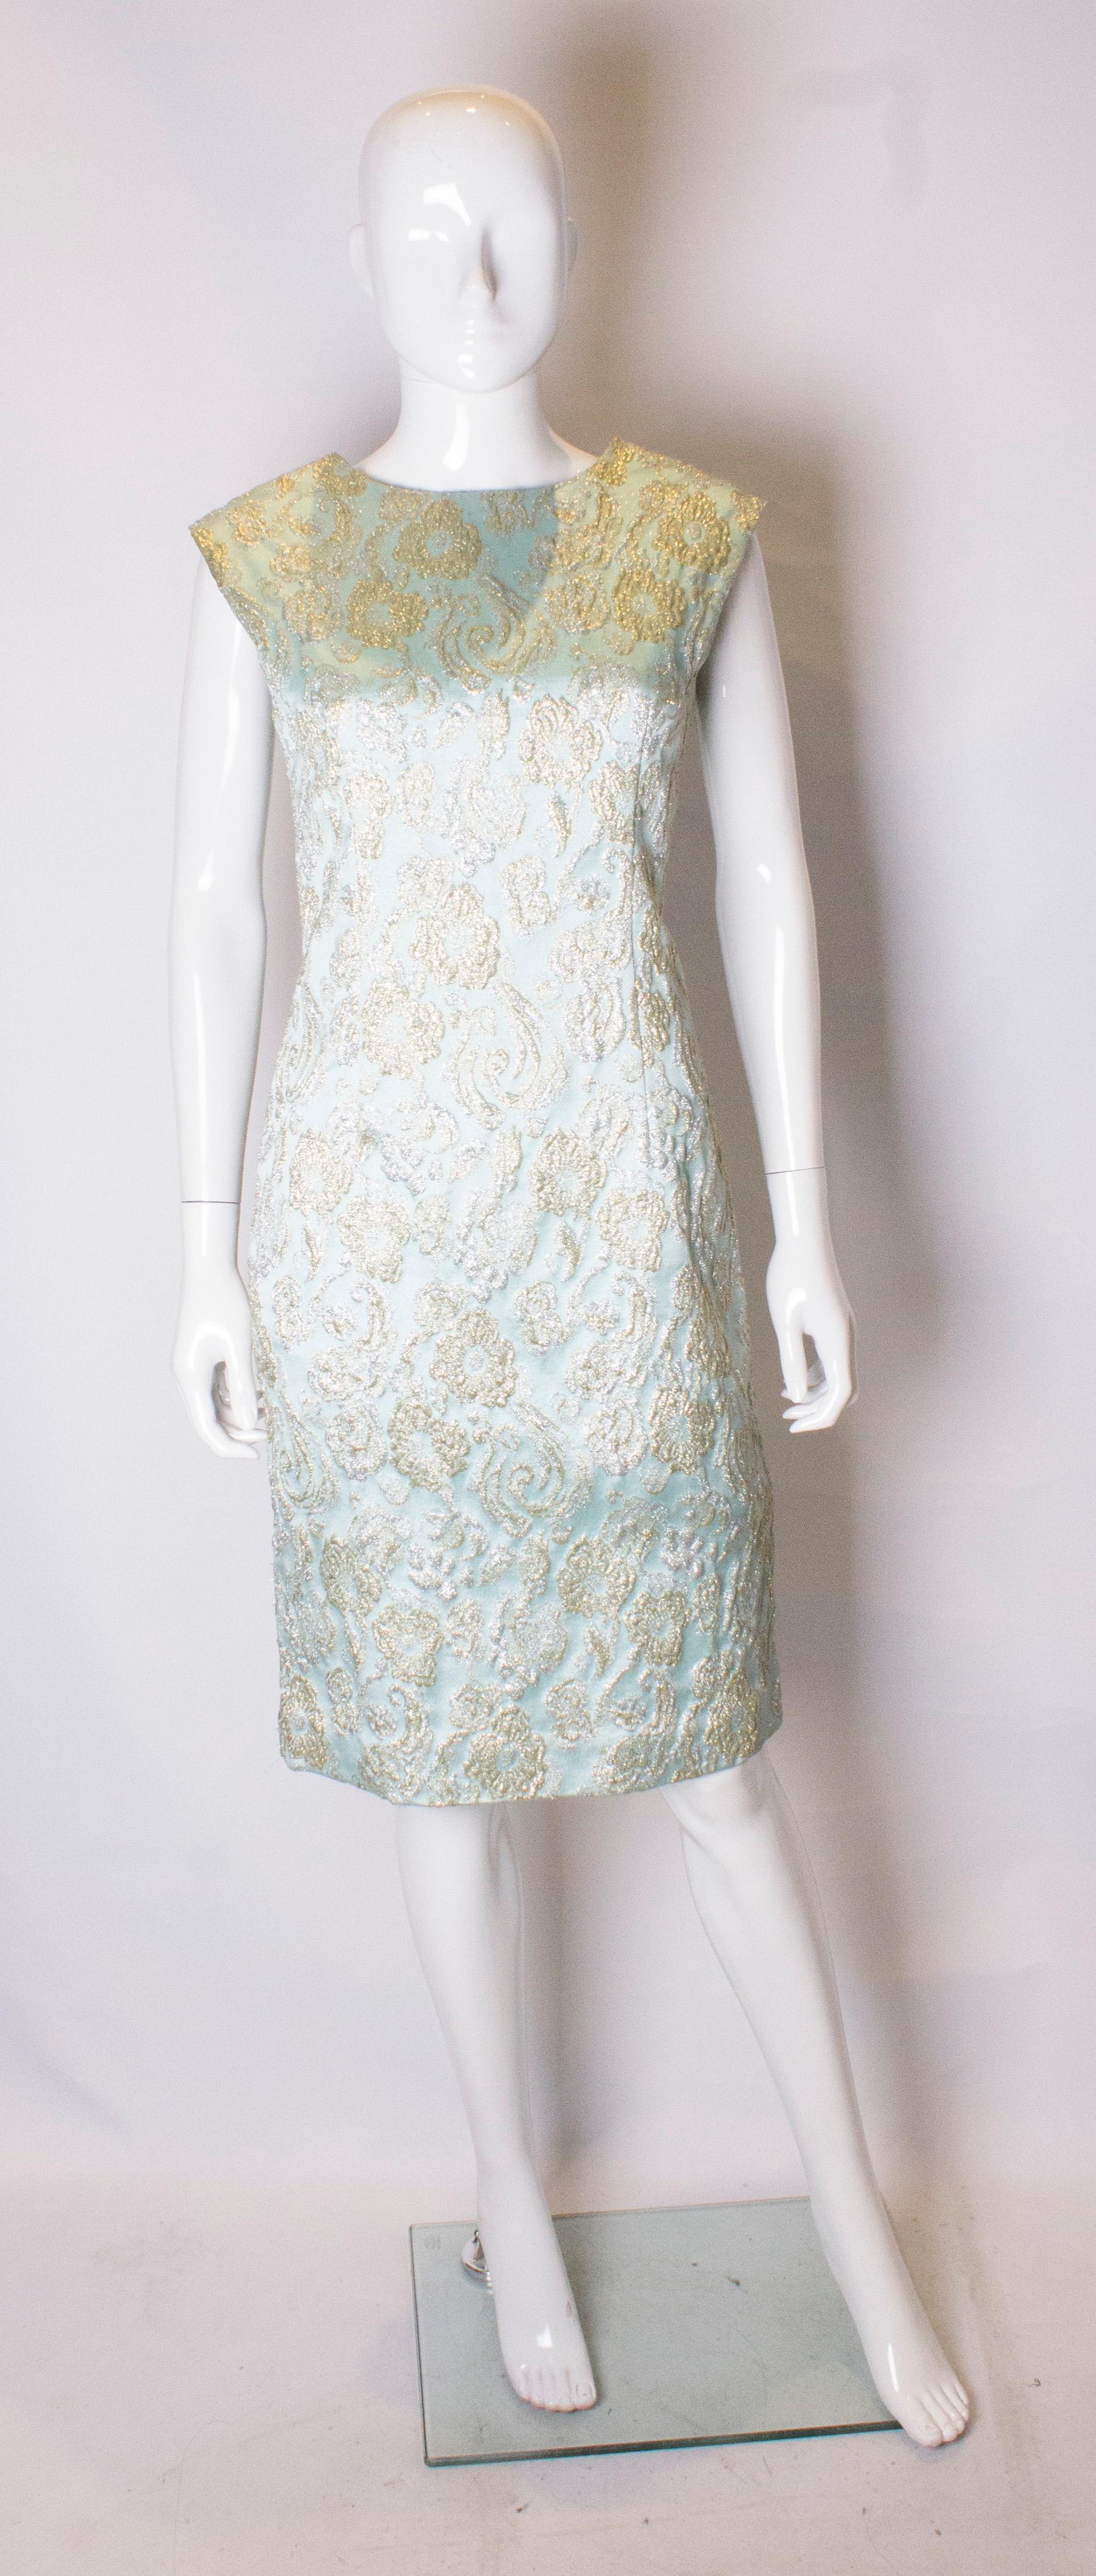 A pretty headturning cocktail dress. The dress is in a blue fabric with gold and silver embellishment. It has a  drape effect on the back and a central back zip. The dress is fully lined.